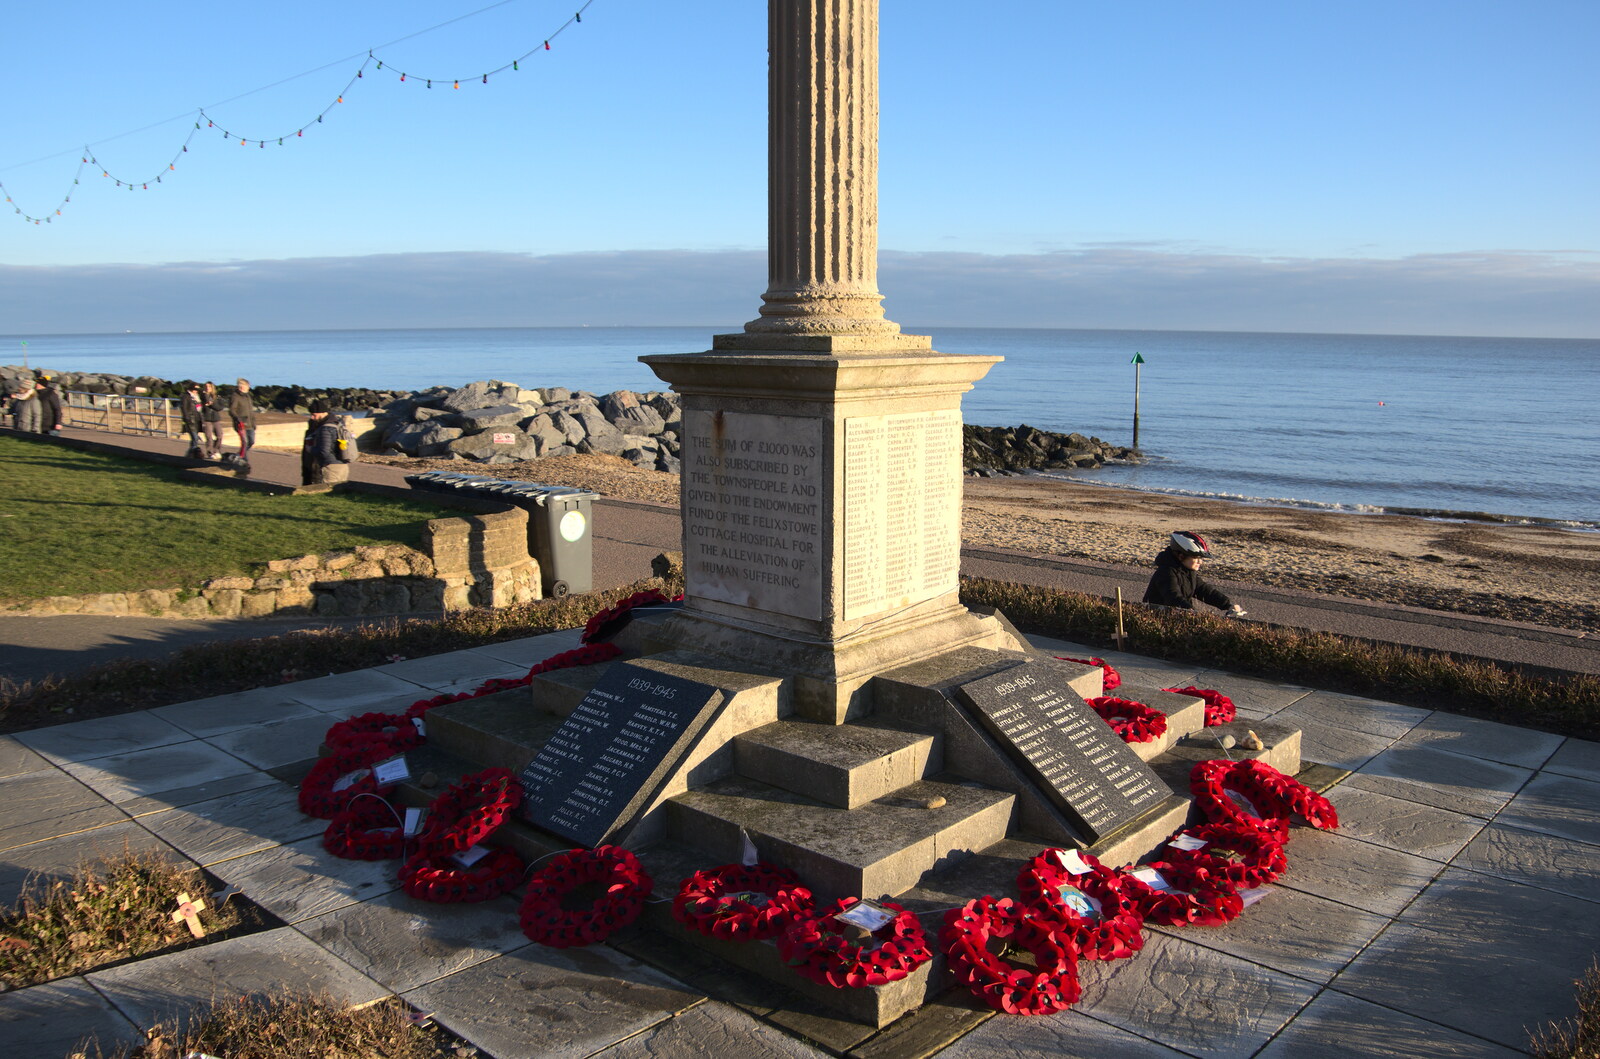 A Short Trip to Felixstowe, Suffolk - 22nd January 2023: The war memorial on Undercliff Road West